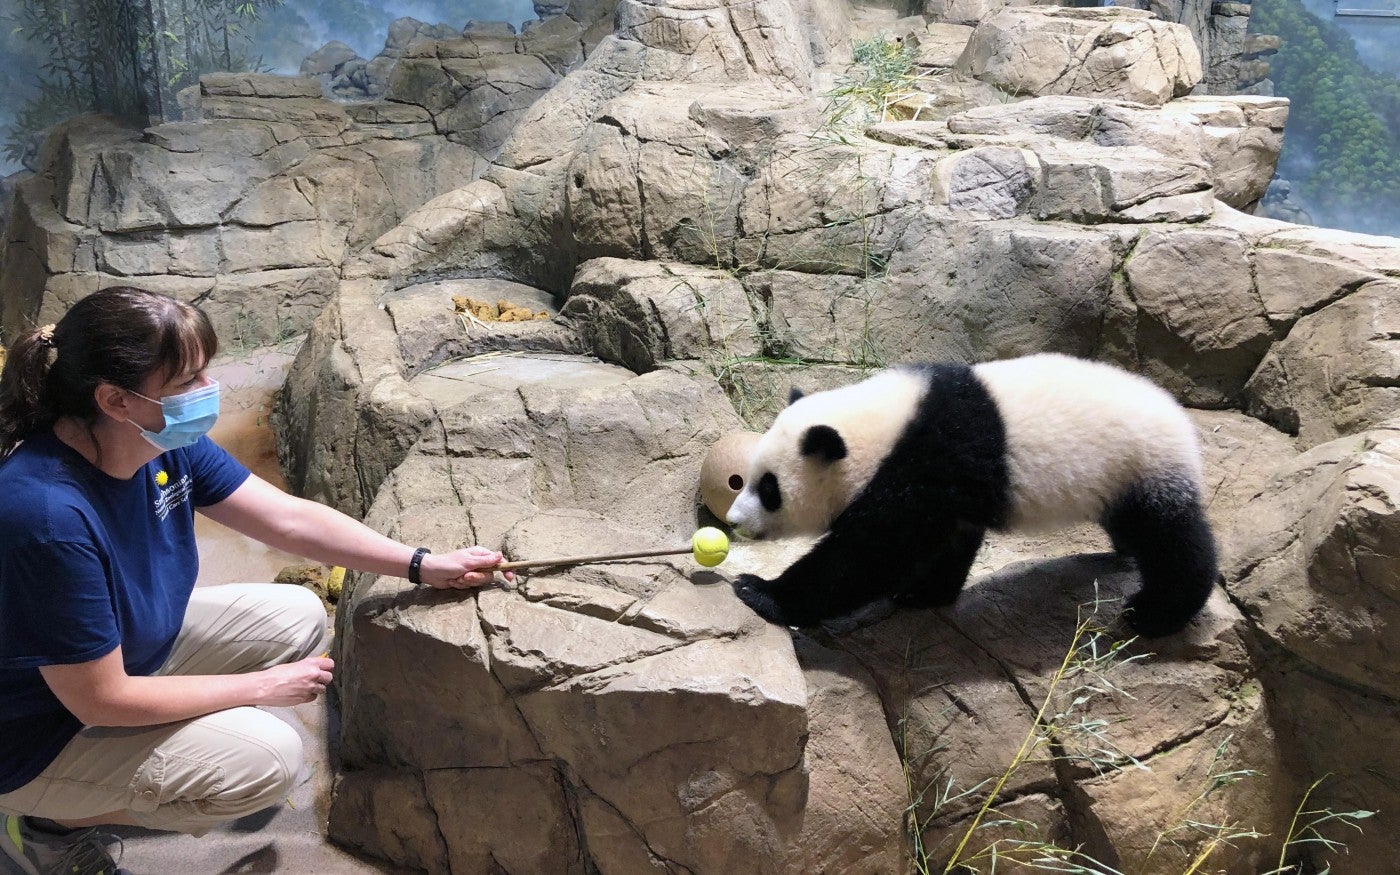 Assistant curator of pandas Laurie Thompson holds a "target" out towards giant panda cub Xiao Qi Ji, who follows the training tool.